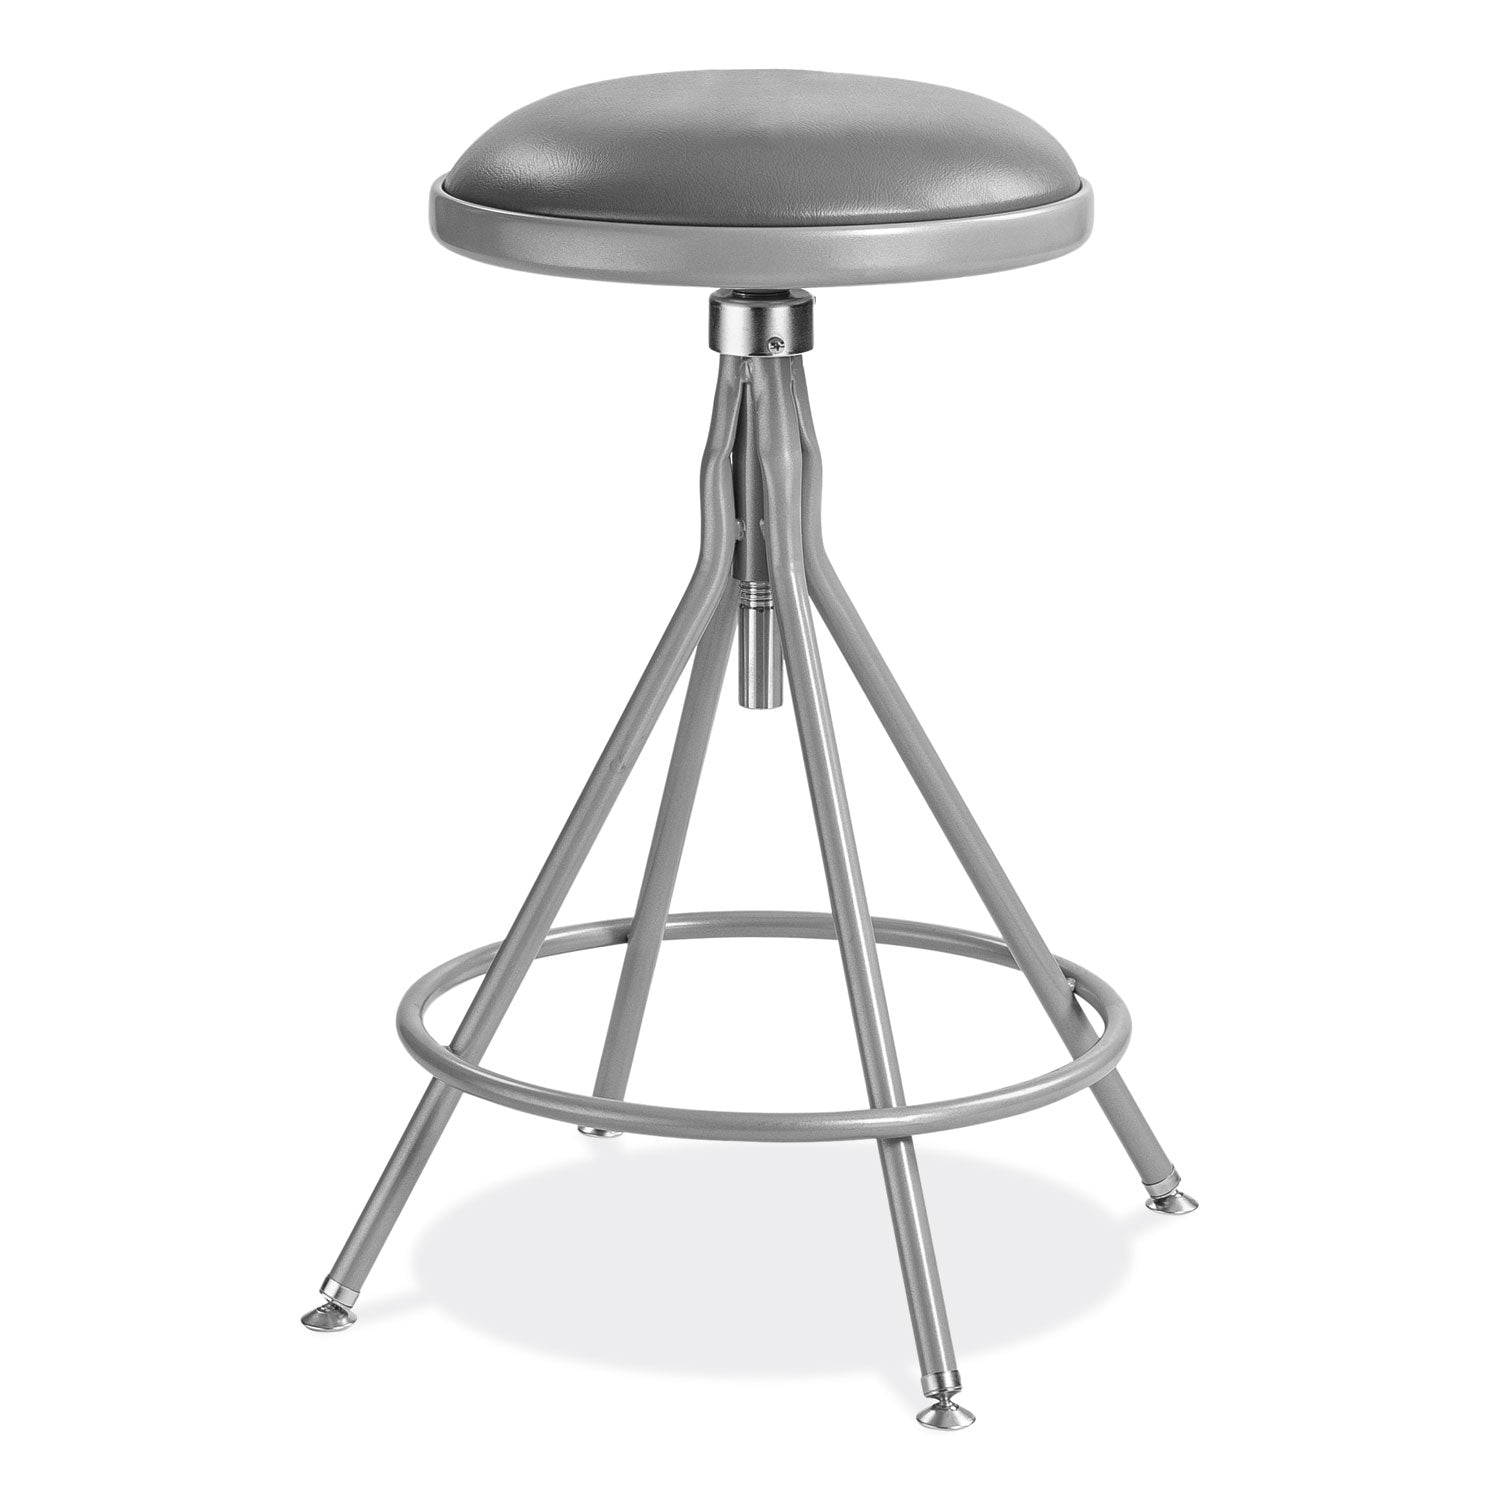 6500-series-height-adjustable-heavy-duty-padded-swivel-stool-supports-500lb-24-30-seat-height-grayships-in-1-3-bus-days_nps6524h - 1